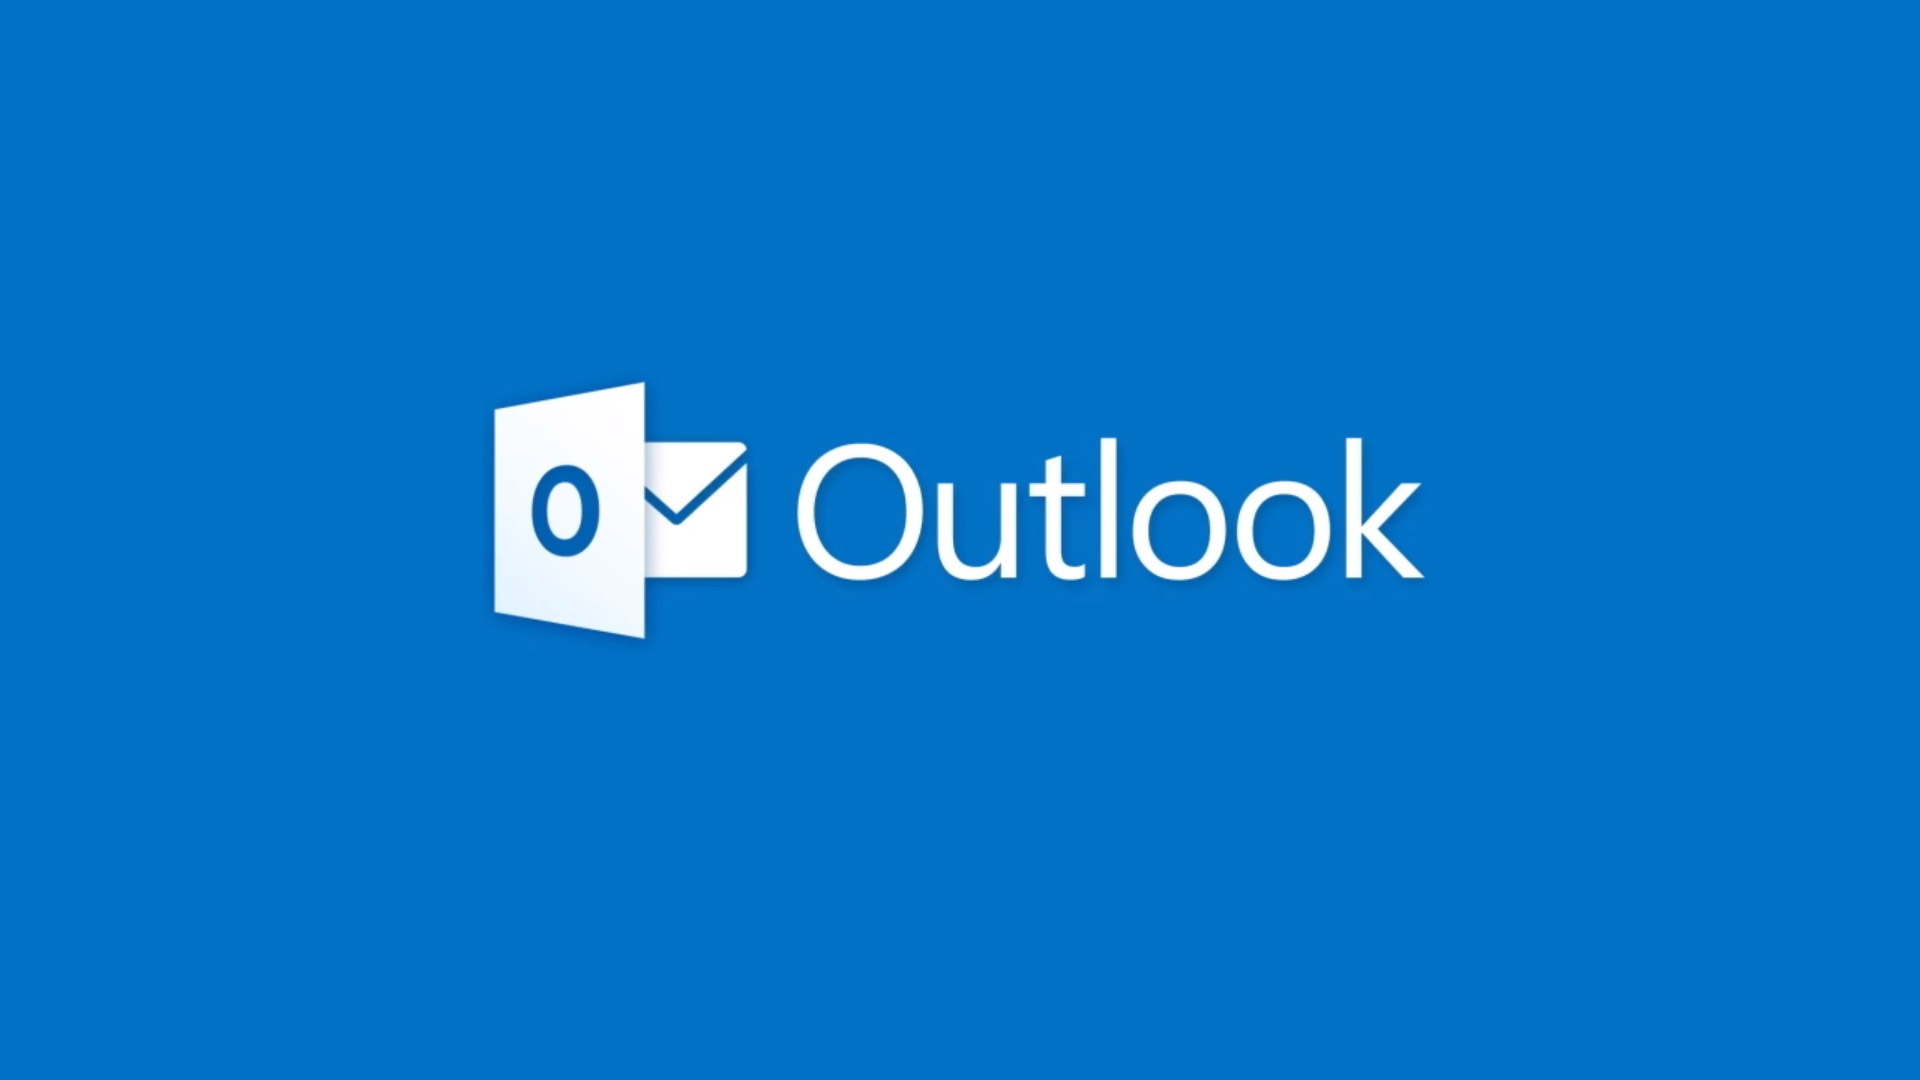 Featured image for “Navigate Microsoft Outlook like a Pro”